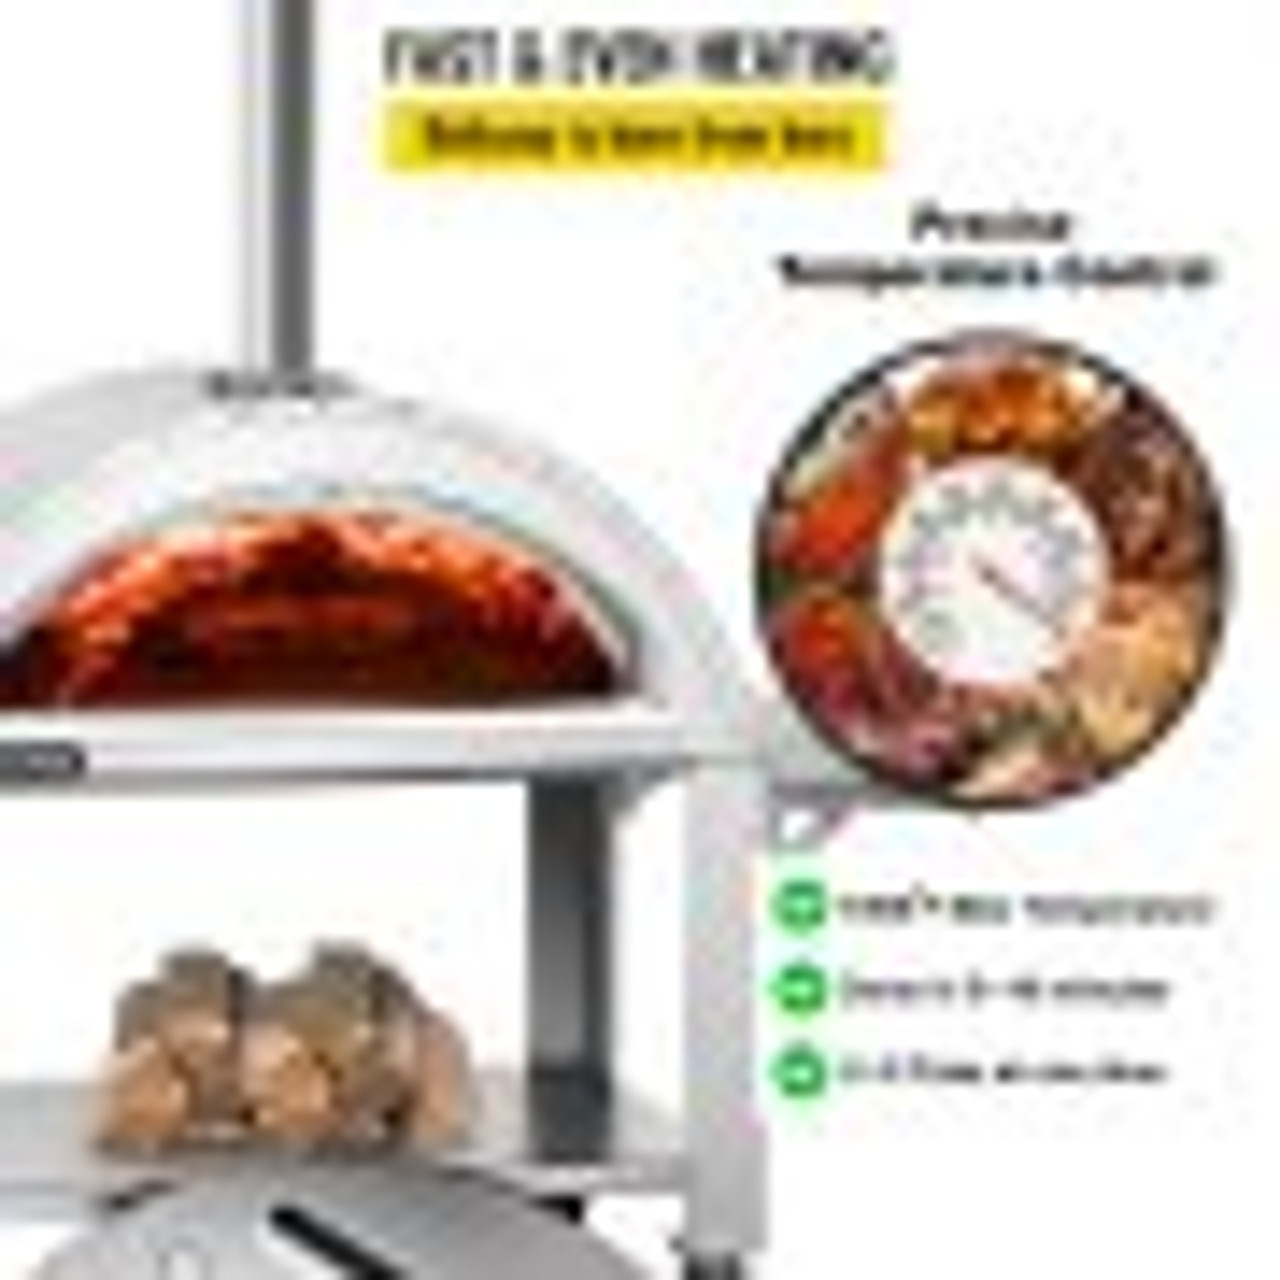 44" Wood Fired Artisan Pizza Oven, 3-Layer Stainless Steel Pizza Maker with Wheels for Outside Kitchen, Includes Pizza Stone, Pizza Peel, and Brush, Professional Series,Outdoor or Indoor.